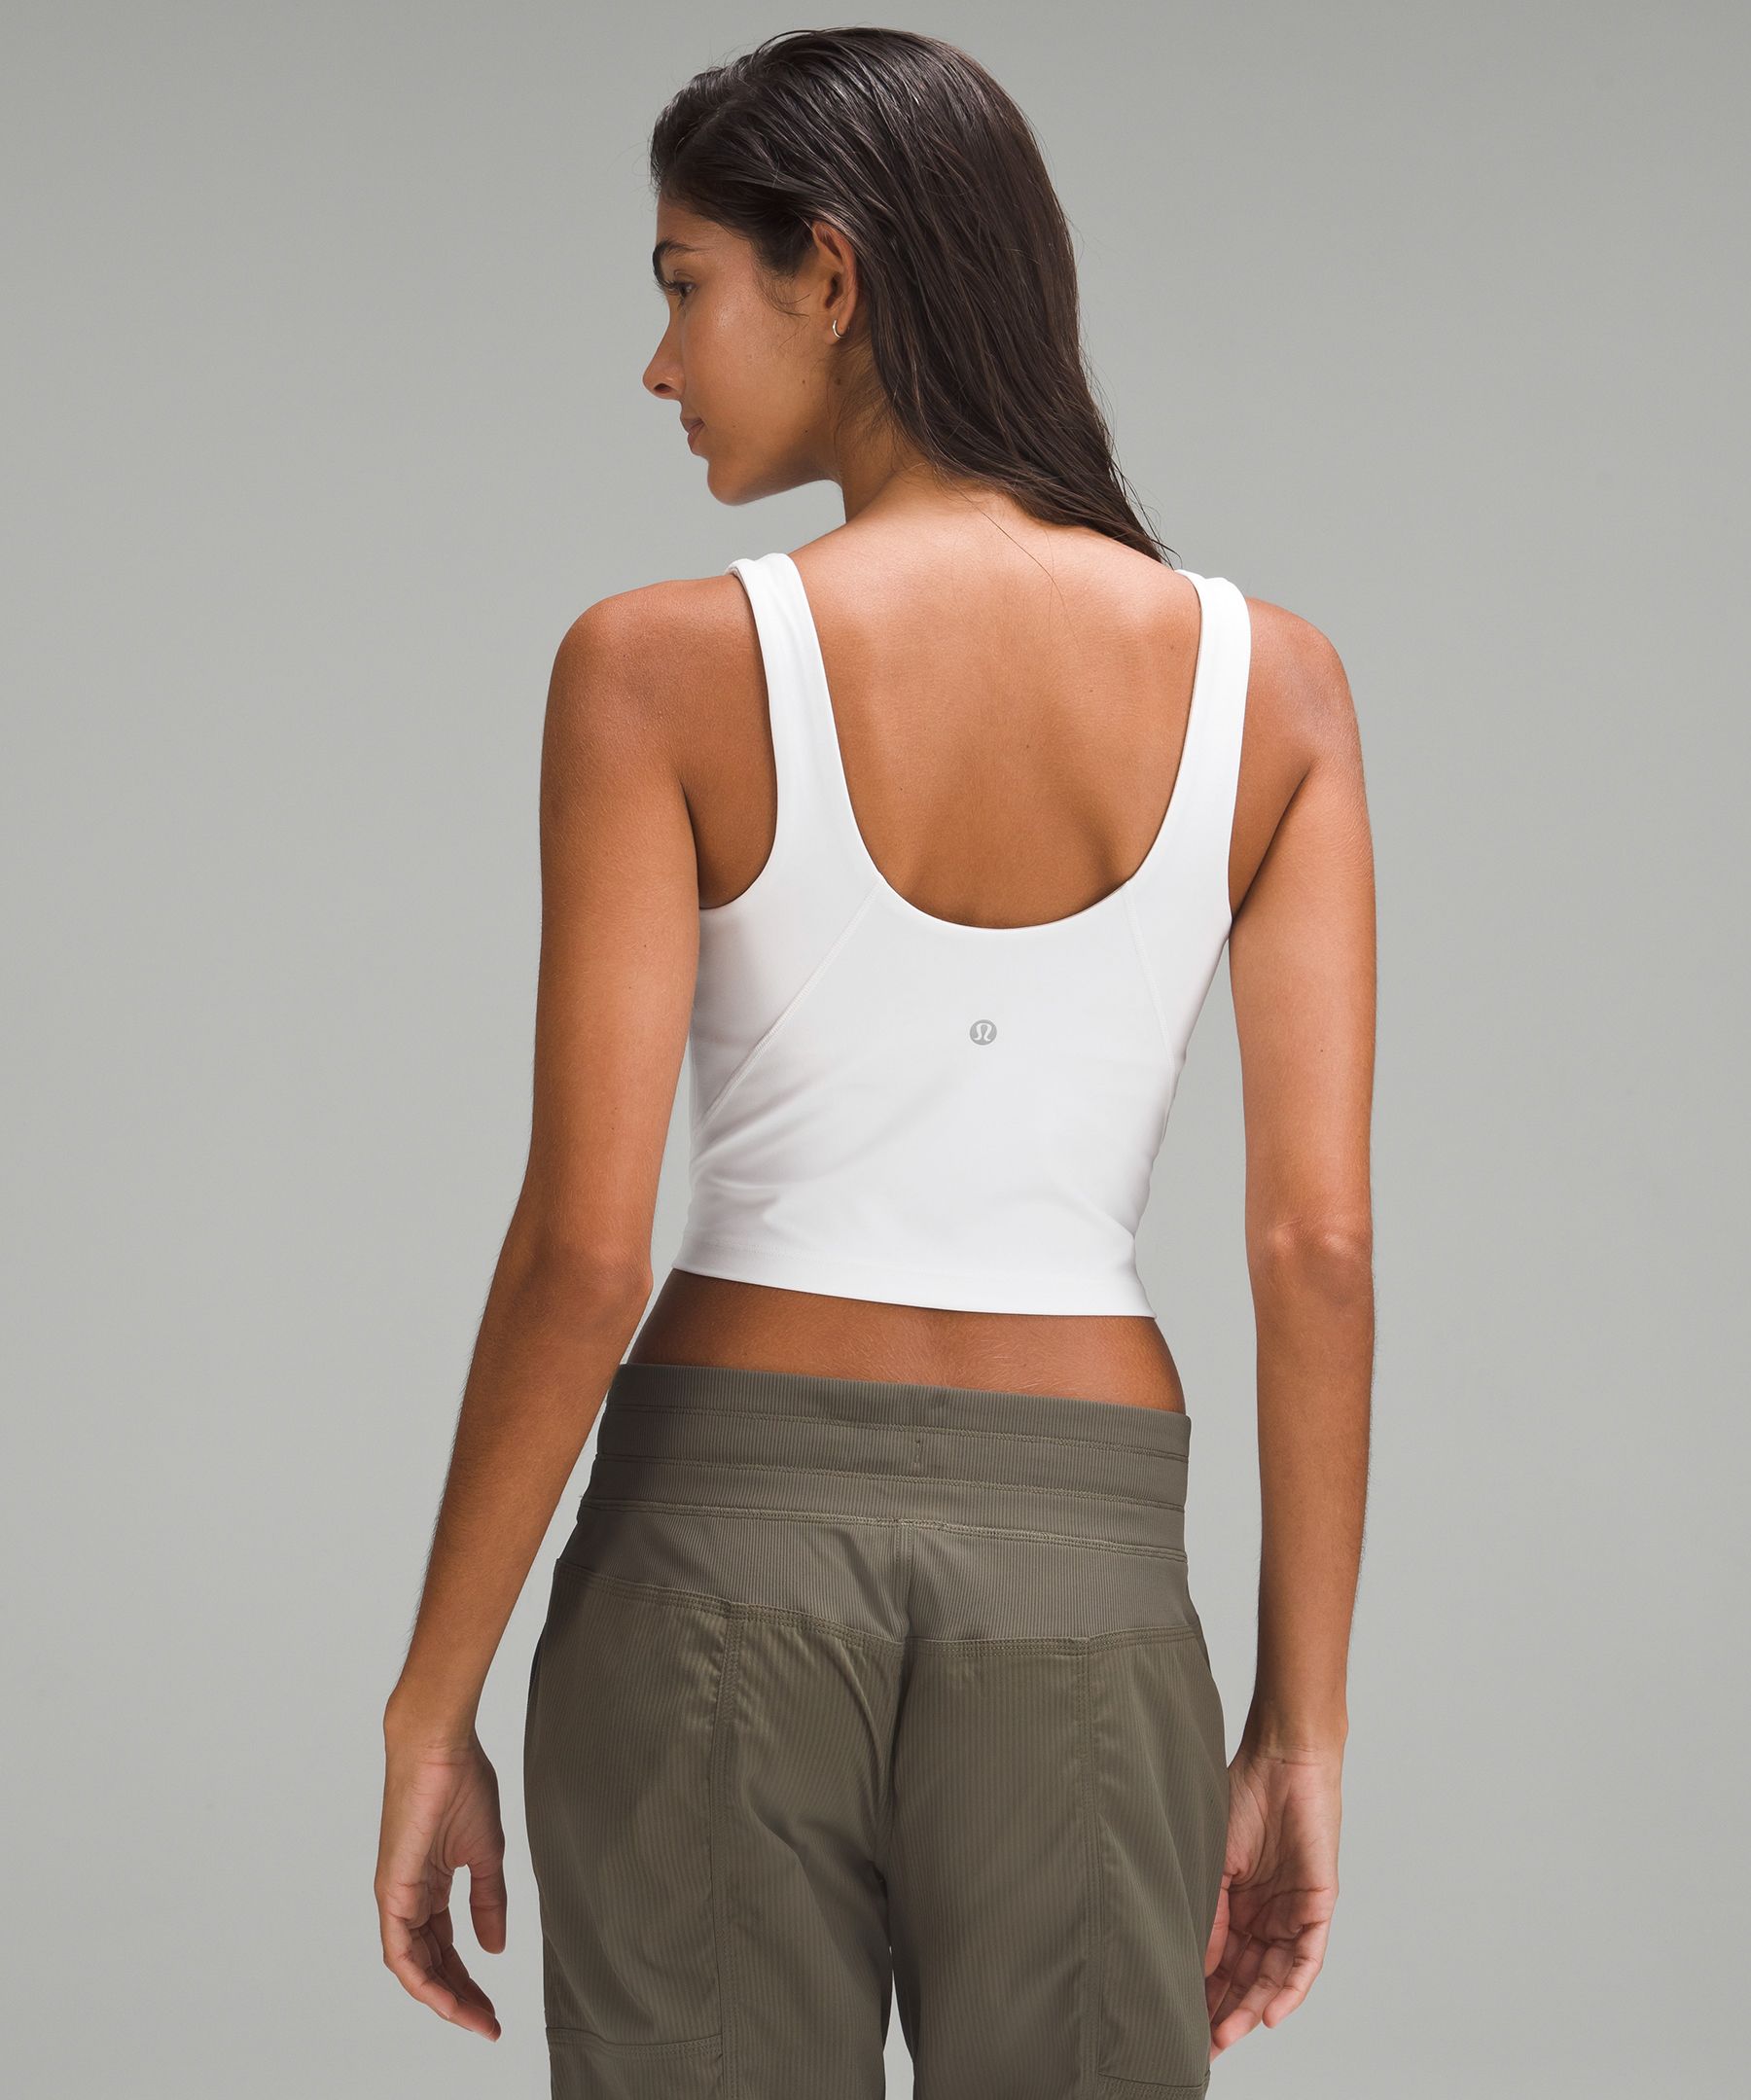 $25 Lululemon Align Dupe Are Sold at Target & They're Highly-Rated